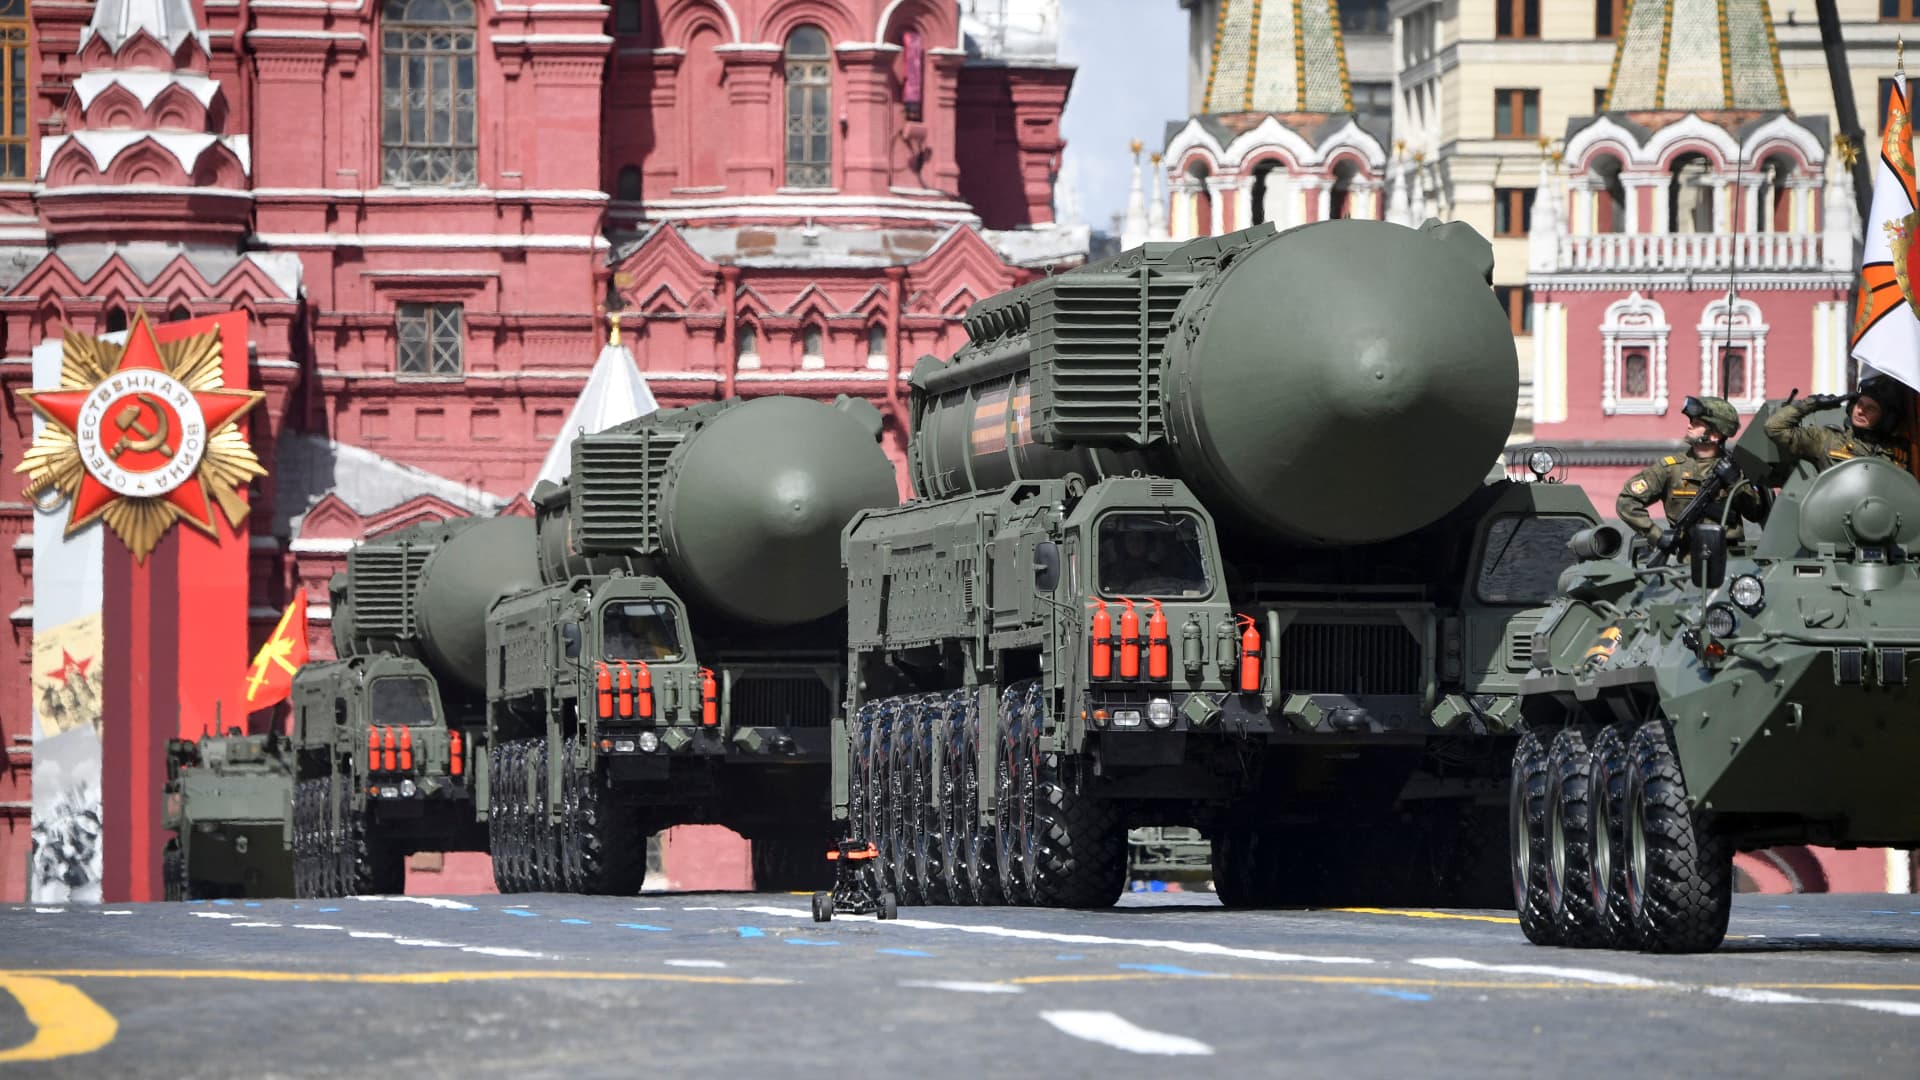 Russian Yars intercontinental ballistic missile launchers parade through Red Square during the Victory Day military parade in central Moscow on May 9, 2022.